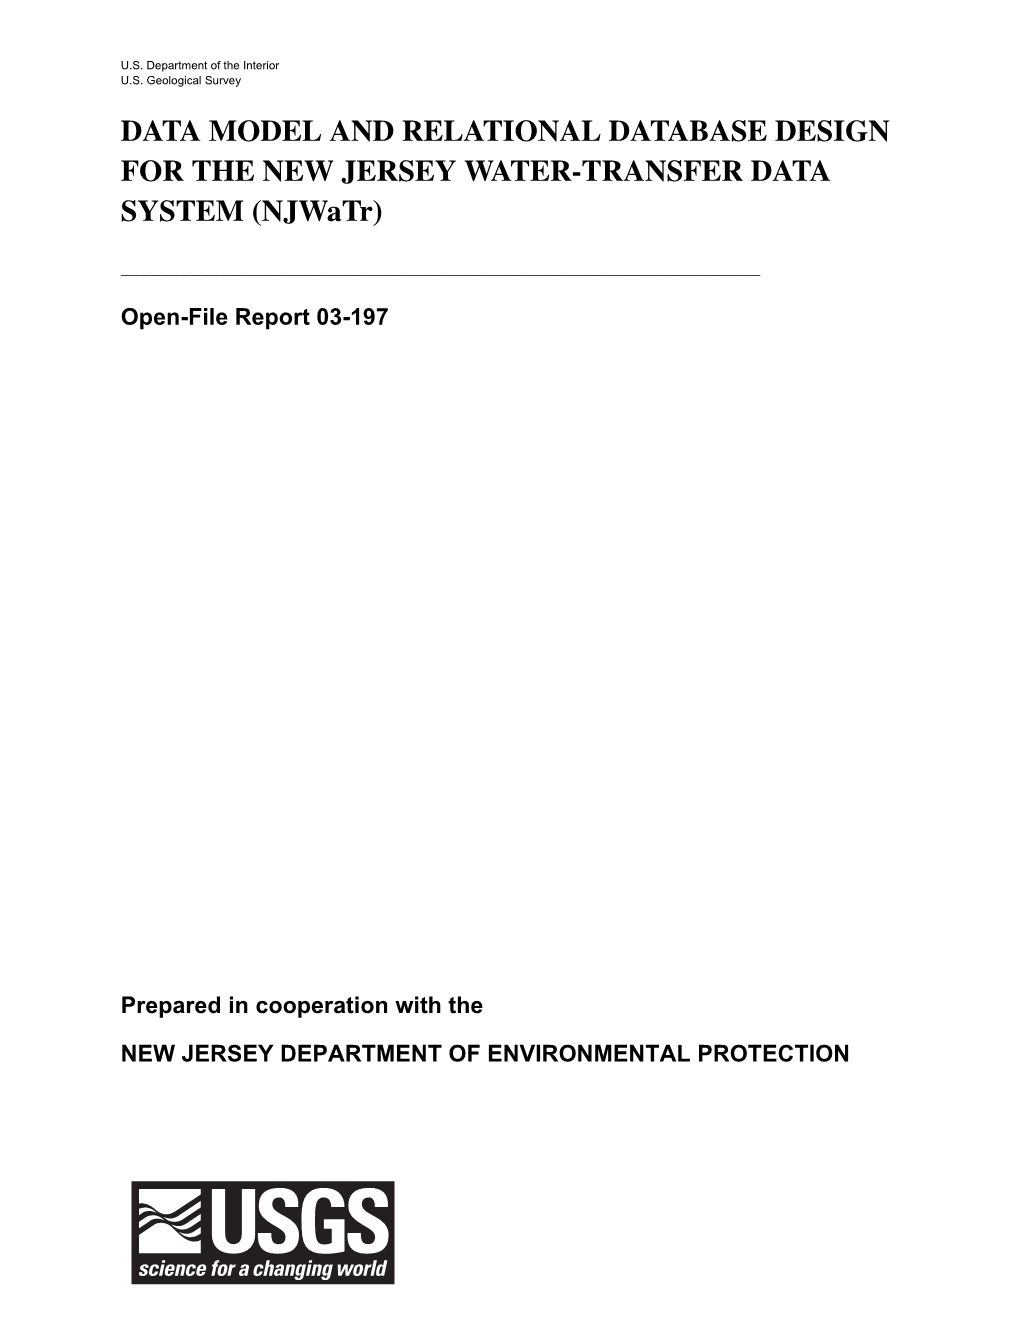 DATA MODEL and RELATIONAL DATABASE DESIGN for the NEW JERSEY WATER-TRANSFER DATA SYSTEM (Njwatr)